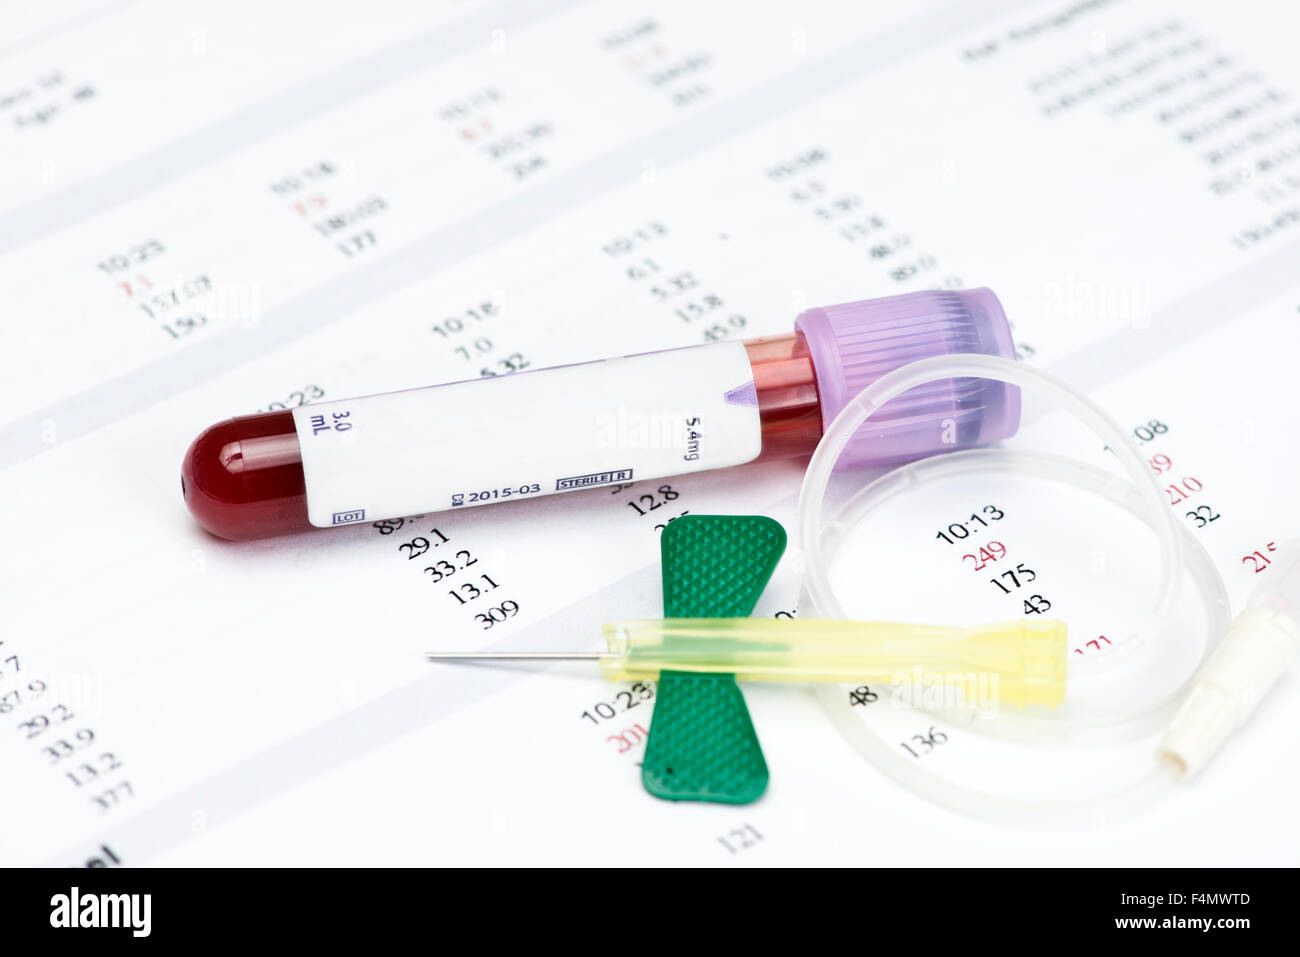 Blood sample in lavender collection tube with catheter and hematology report. Stock Photo